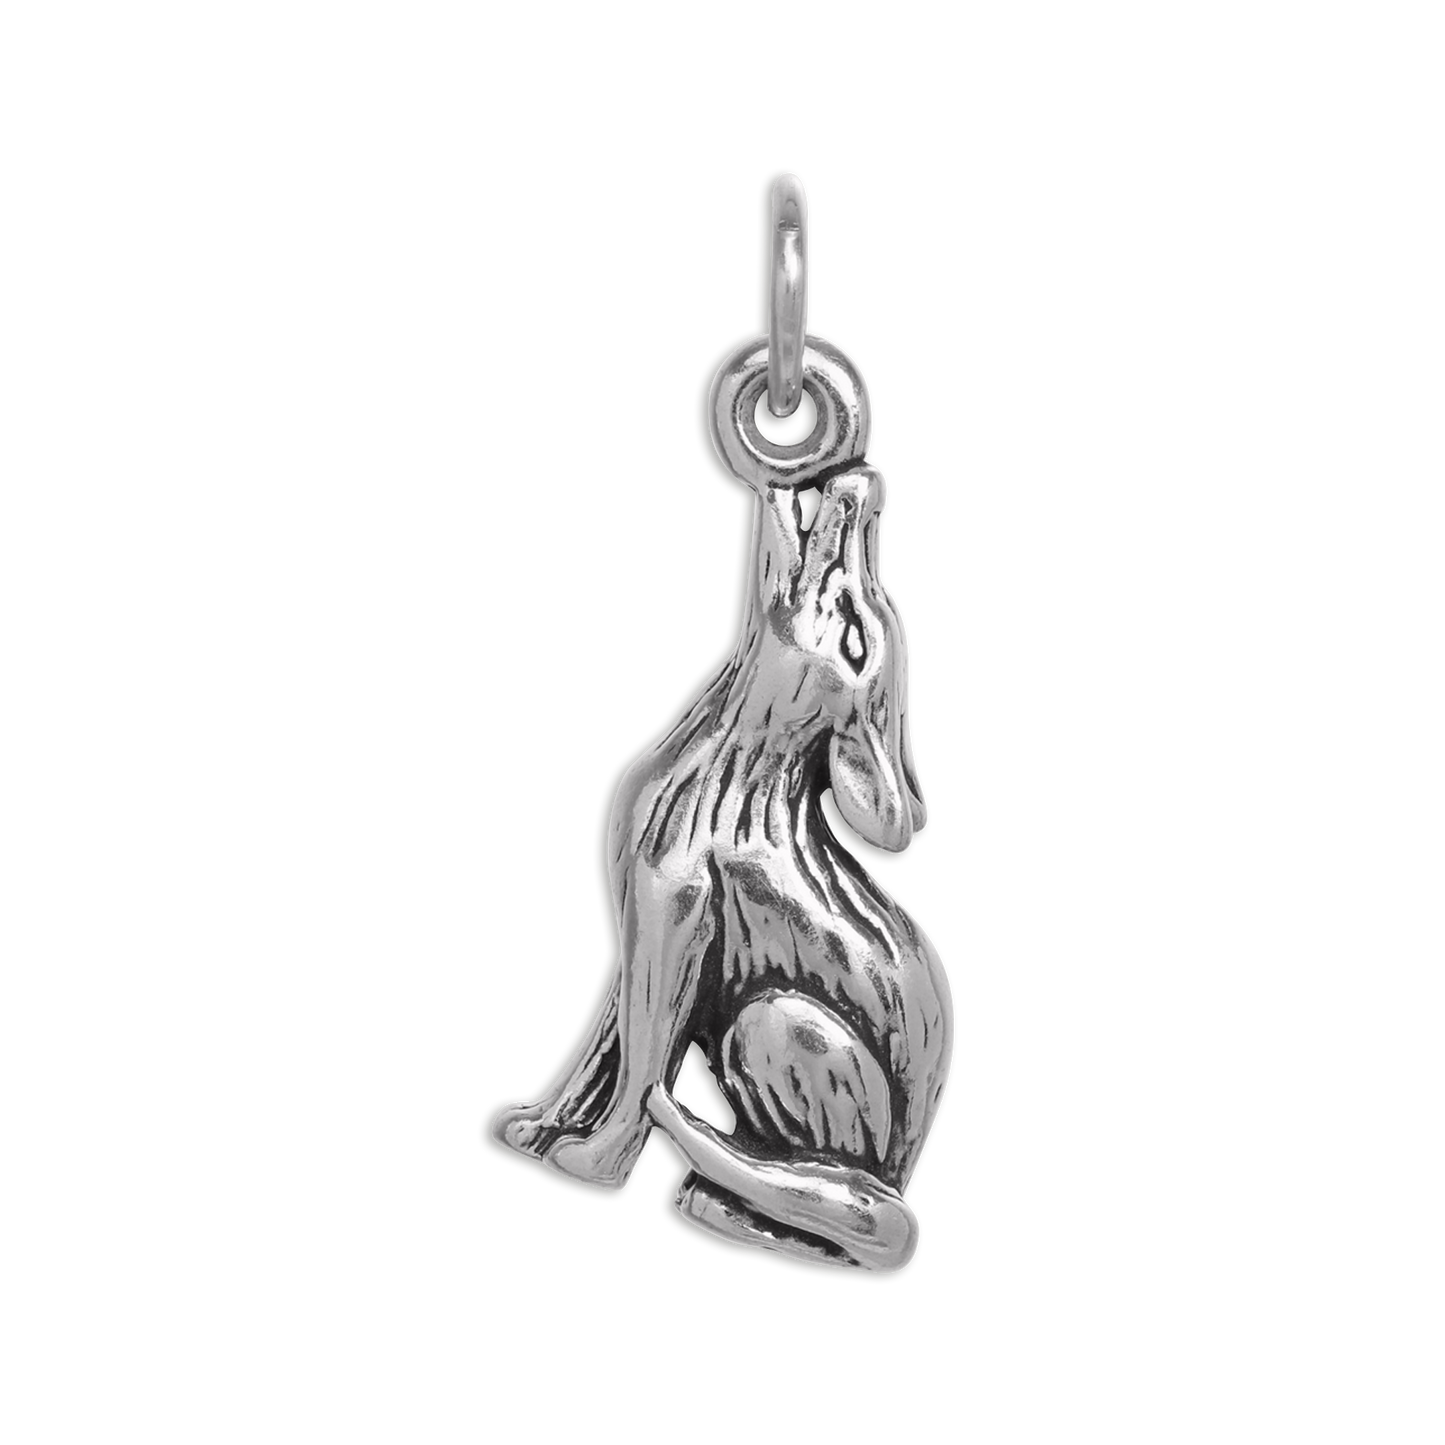 Sterling Silver Howling Coyote Charm